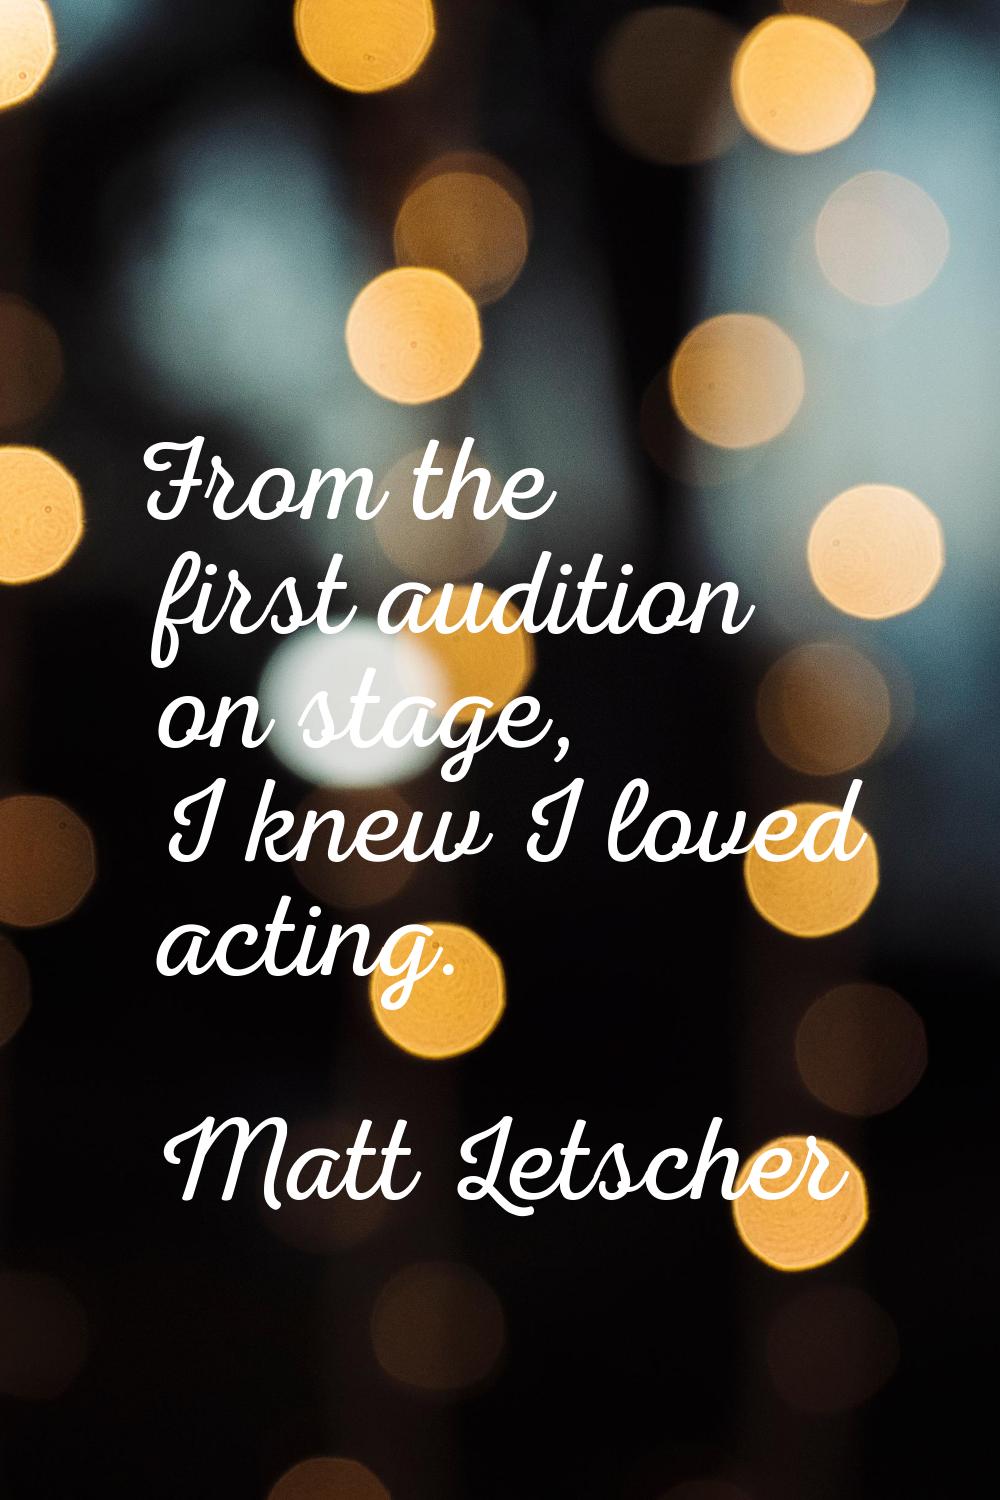 From the first audition on stage, I knew I loved acting.